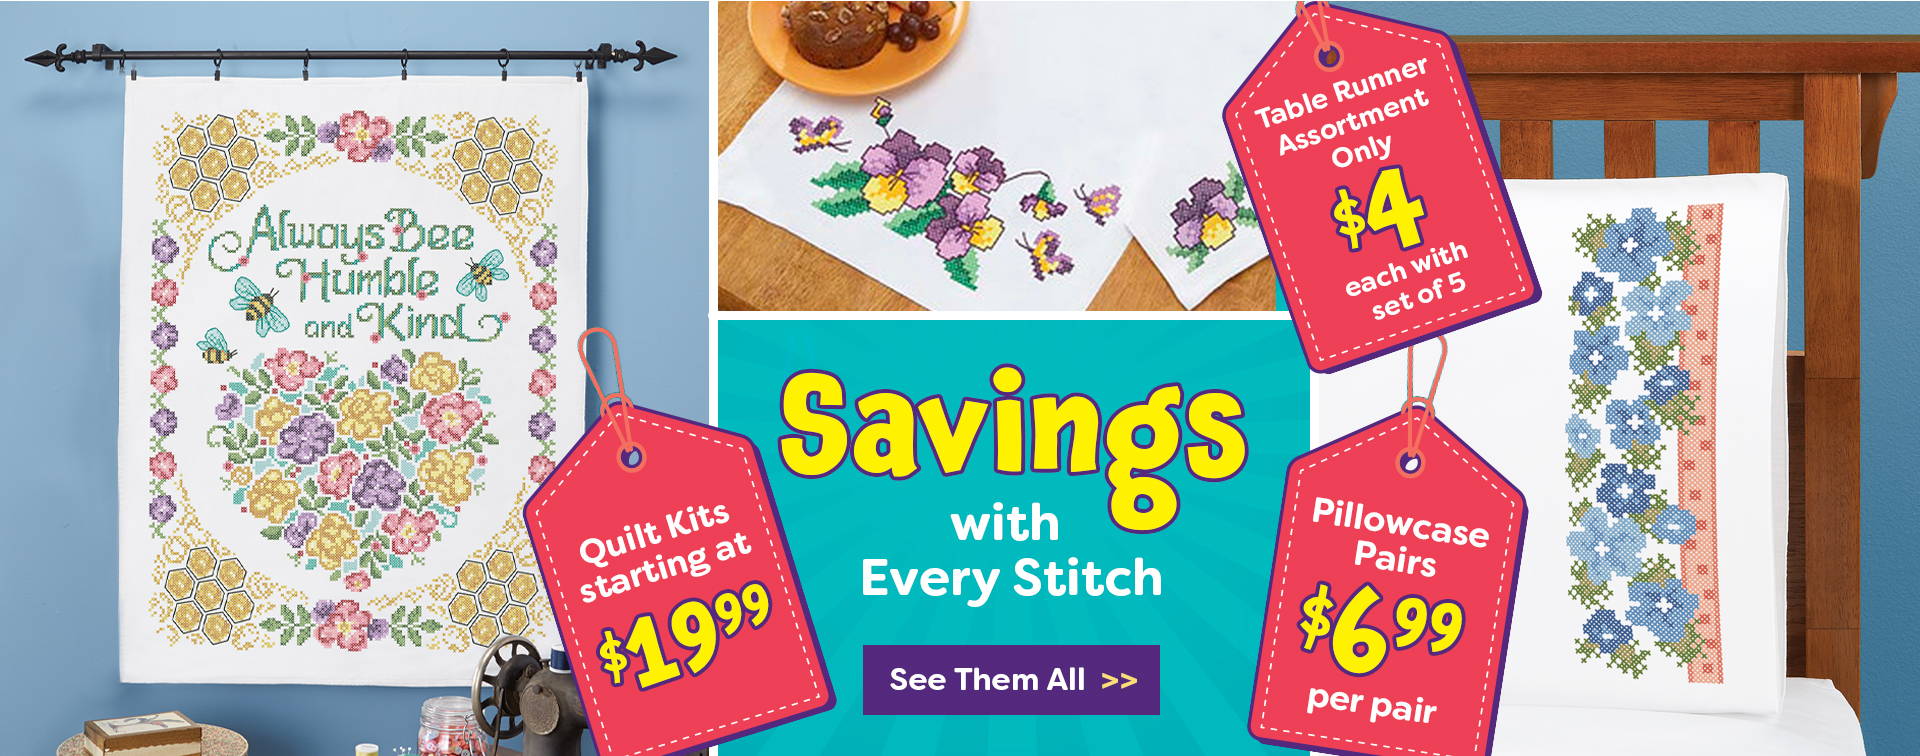 Savings with every stitch. Quilt kits starting at $19.99. Table runner assortment only $4 each with set of 5. Pillowcase pairs $6.99 per pair. 